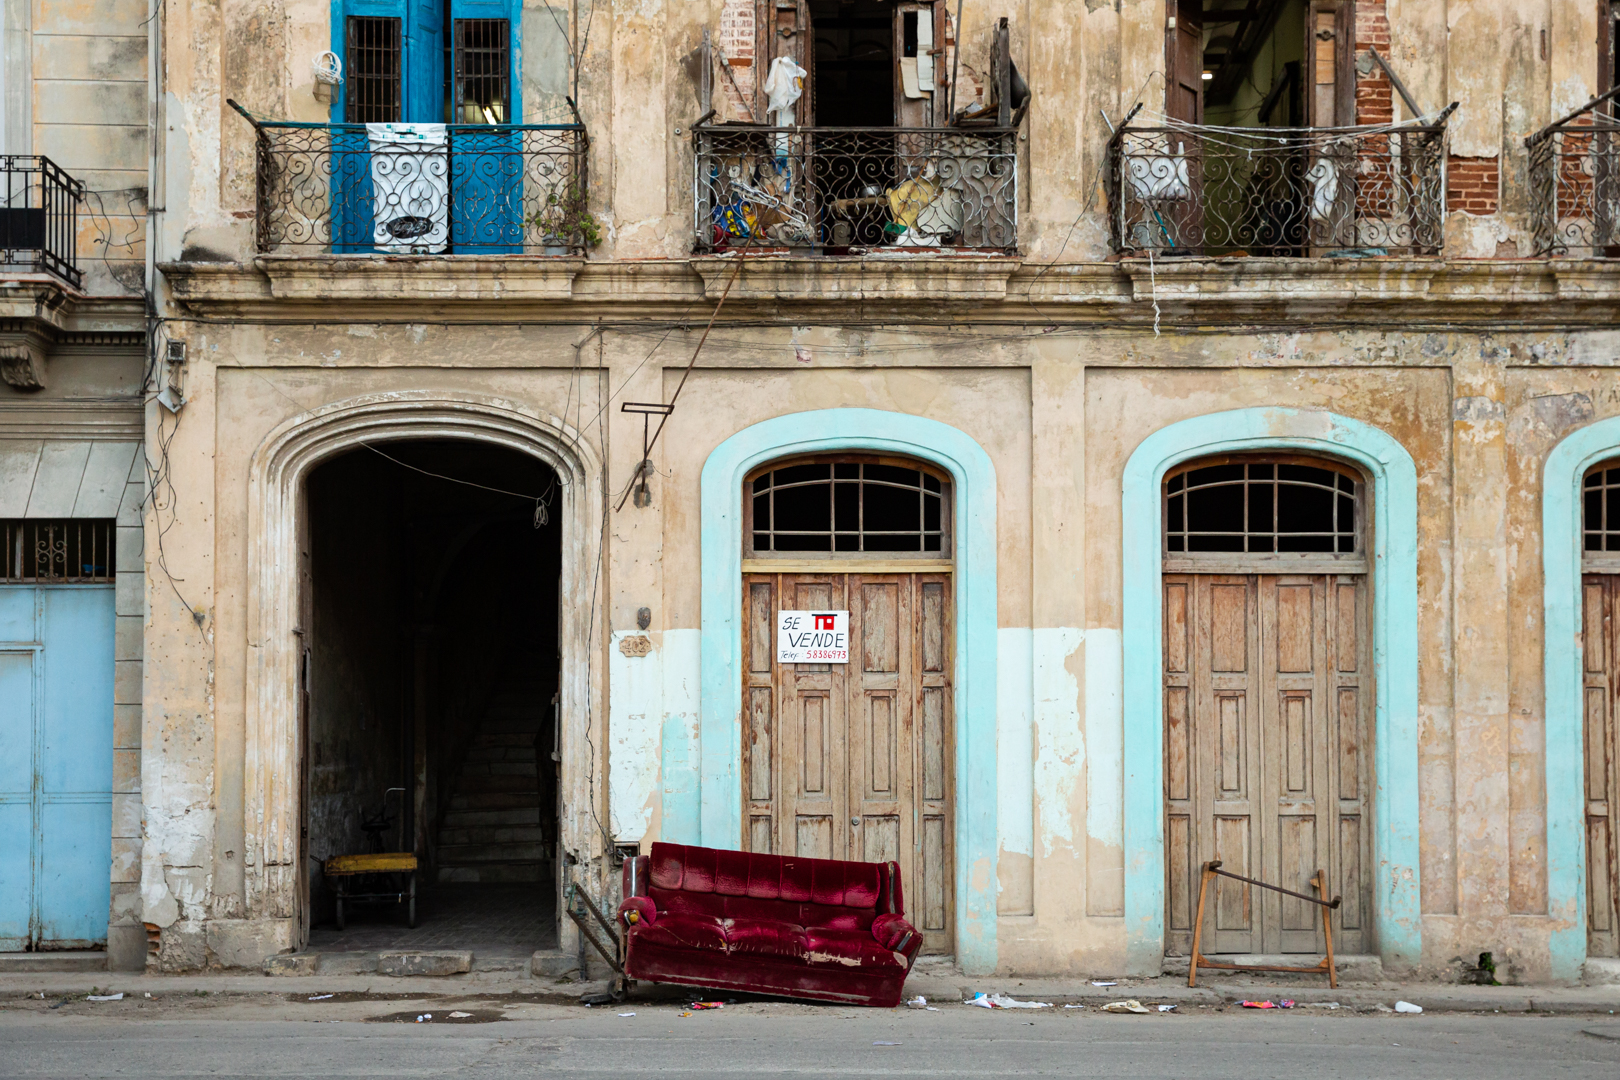 Important things to know before you visit Cuba - Cuba is economically disadvantaged